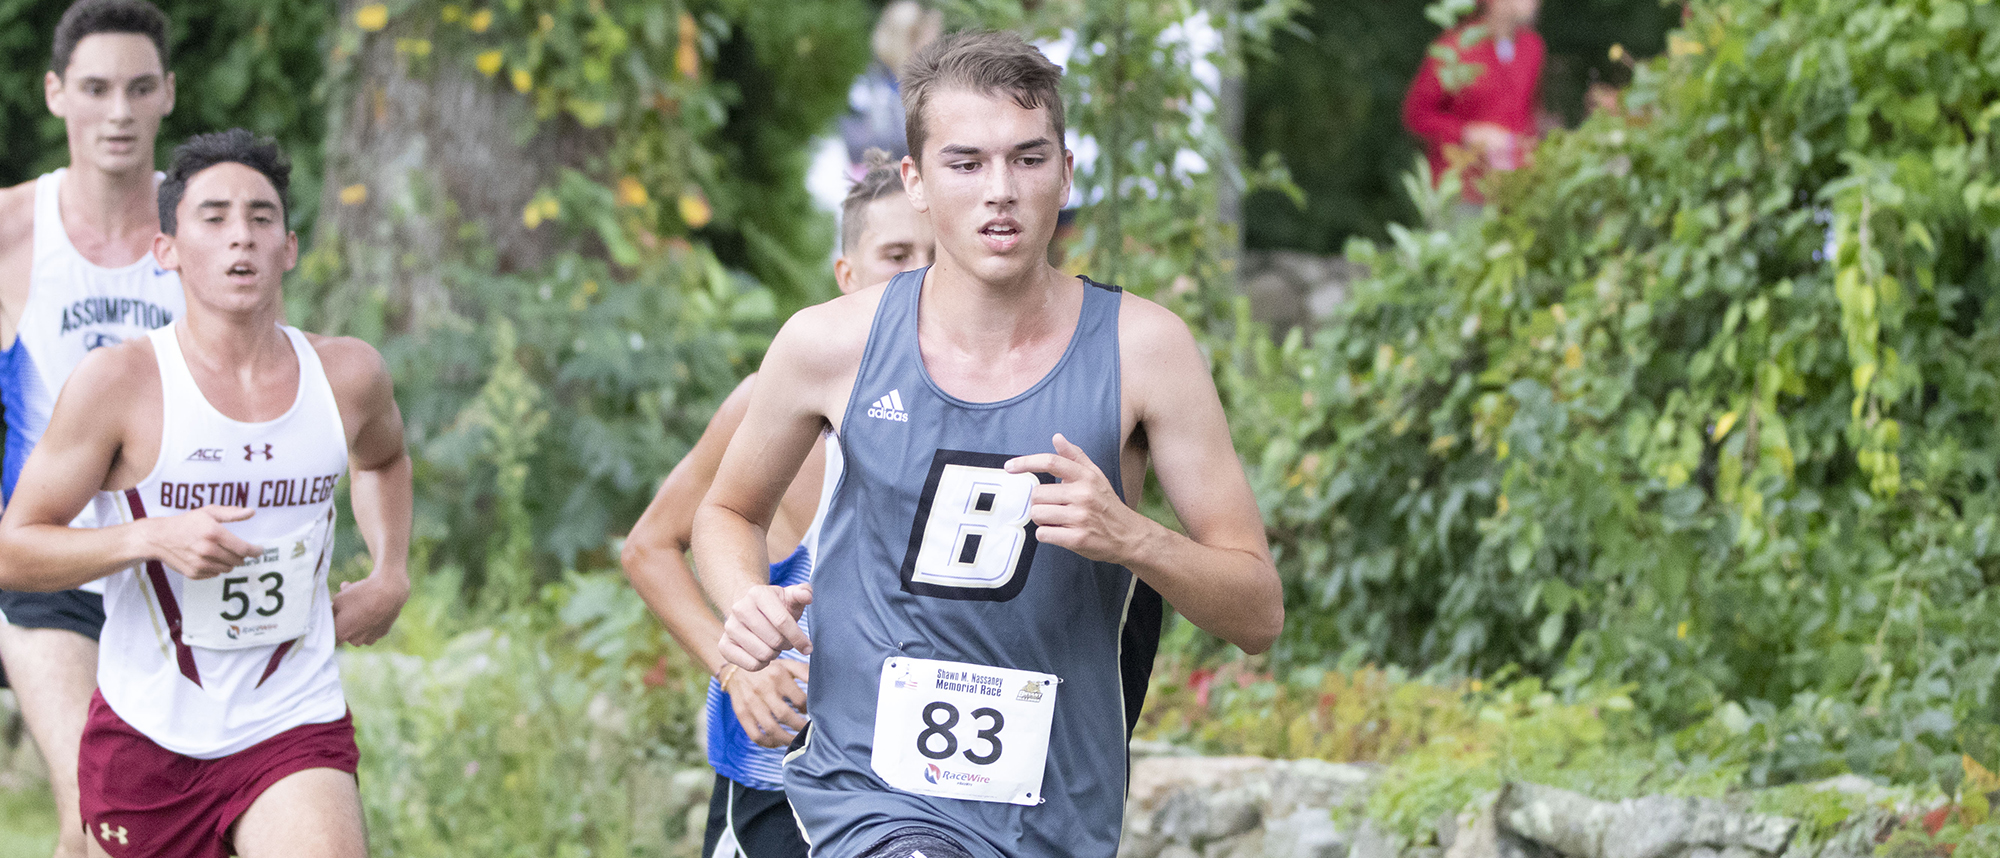 Bulldogs to run in Ted Owens Invitational on Saturday